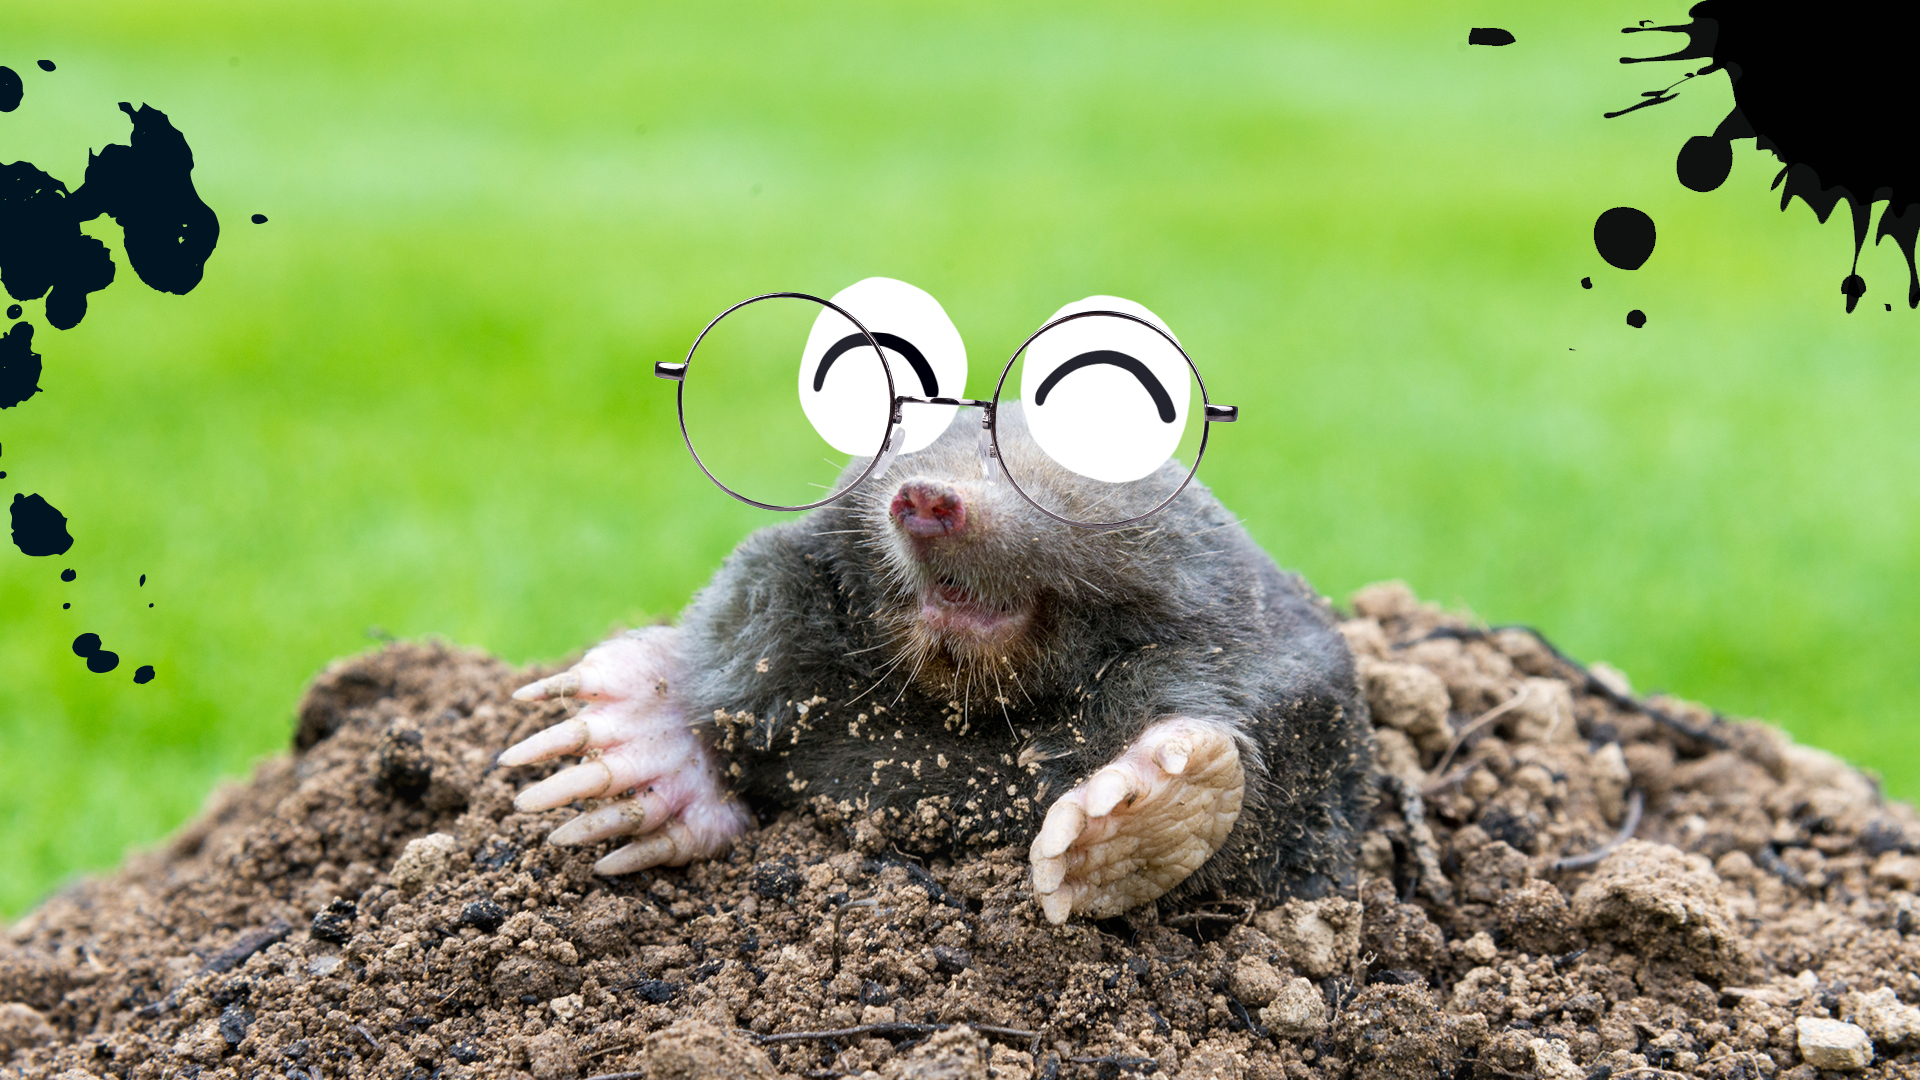 A mole wearing glasses emerges from the ground